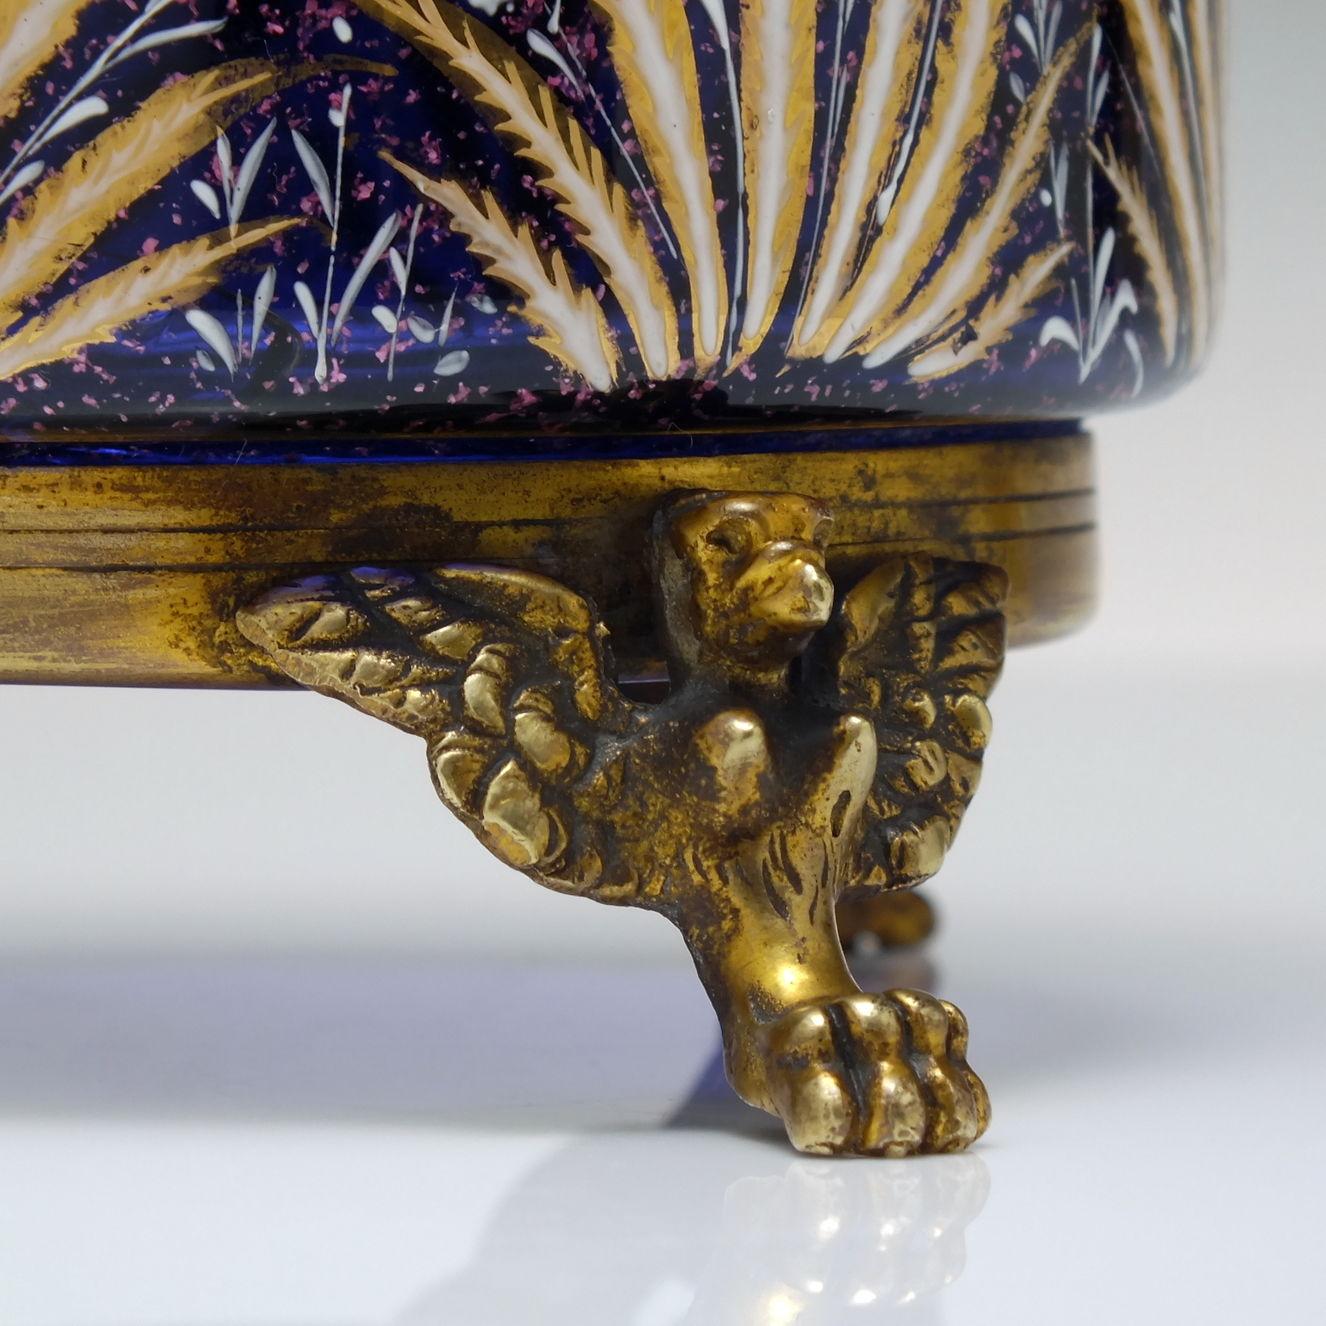 Technical Description 

A truly stunning pair of 19th-century glass vases hand-decorated in polychromatic enamels with grasses, flowers, and birds. Mounted on brass stands with three legs in the form of griffins. Blue glass with pink flecks when